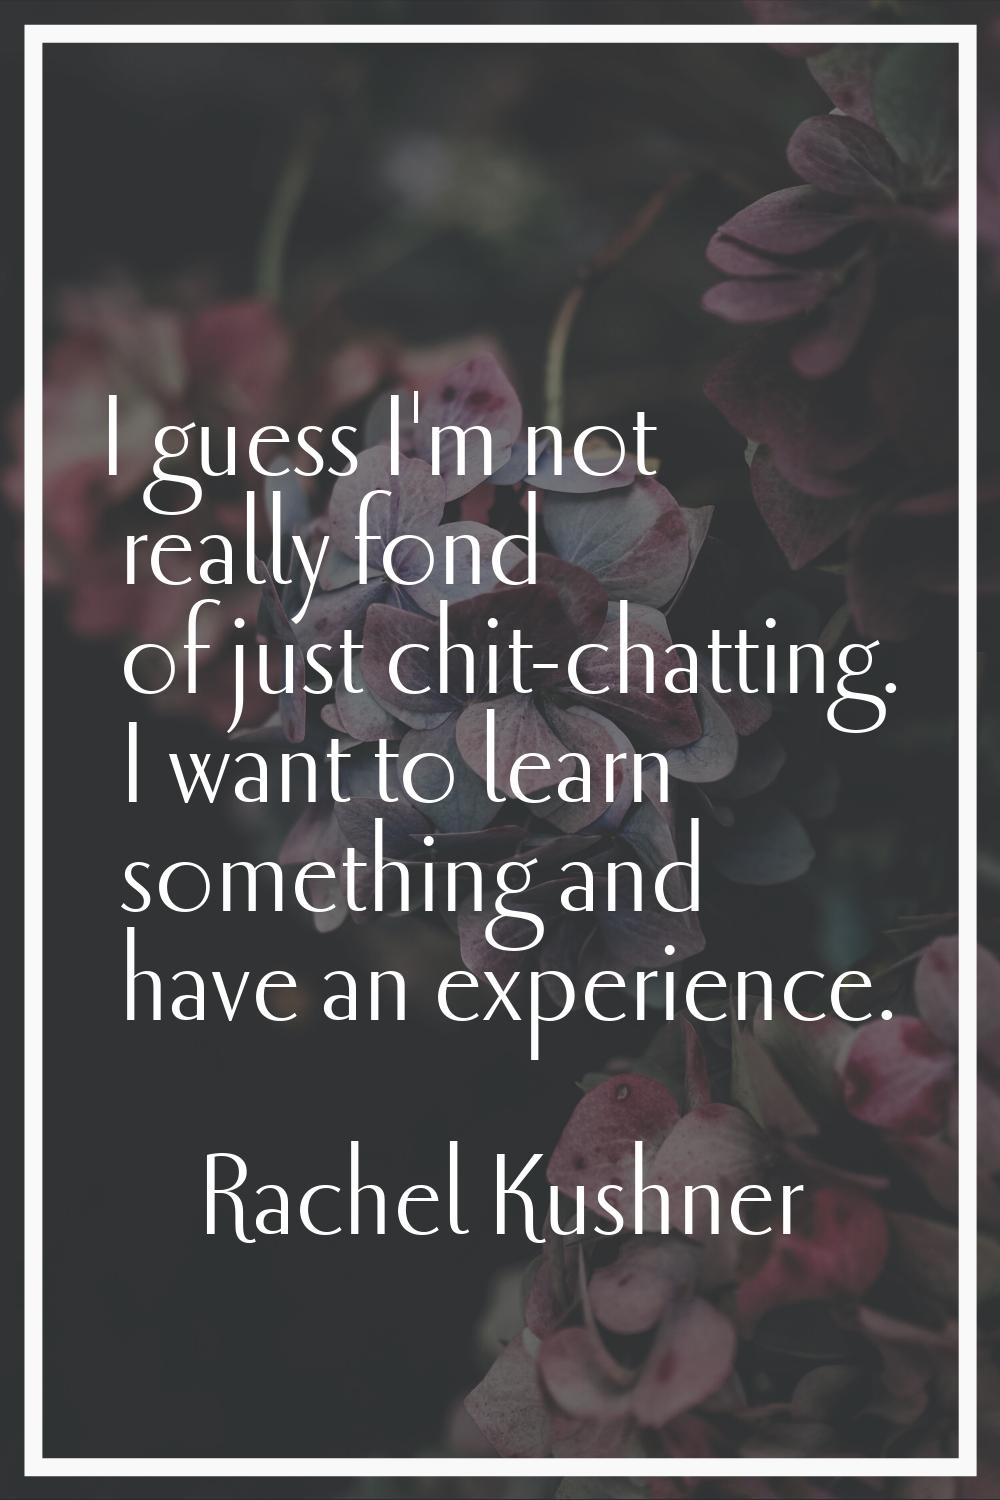 I guess I'm not really fond of just chit-chatting. I want to learn something and have an experience